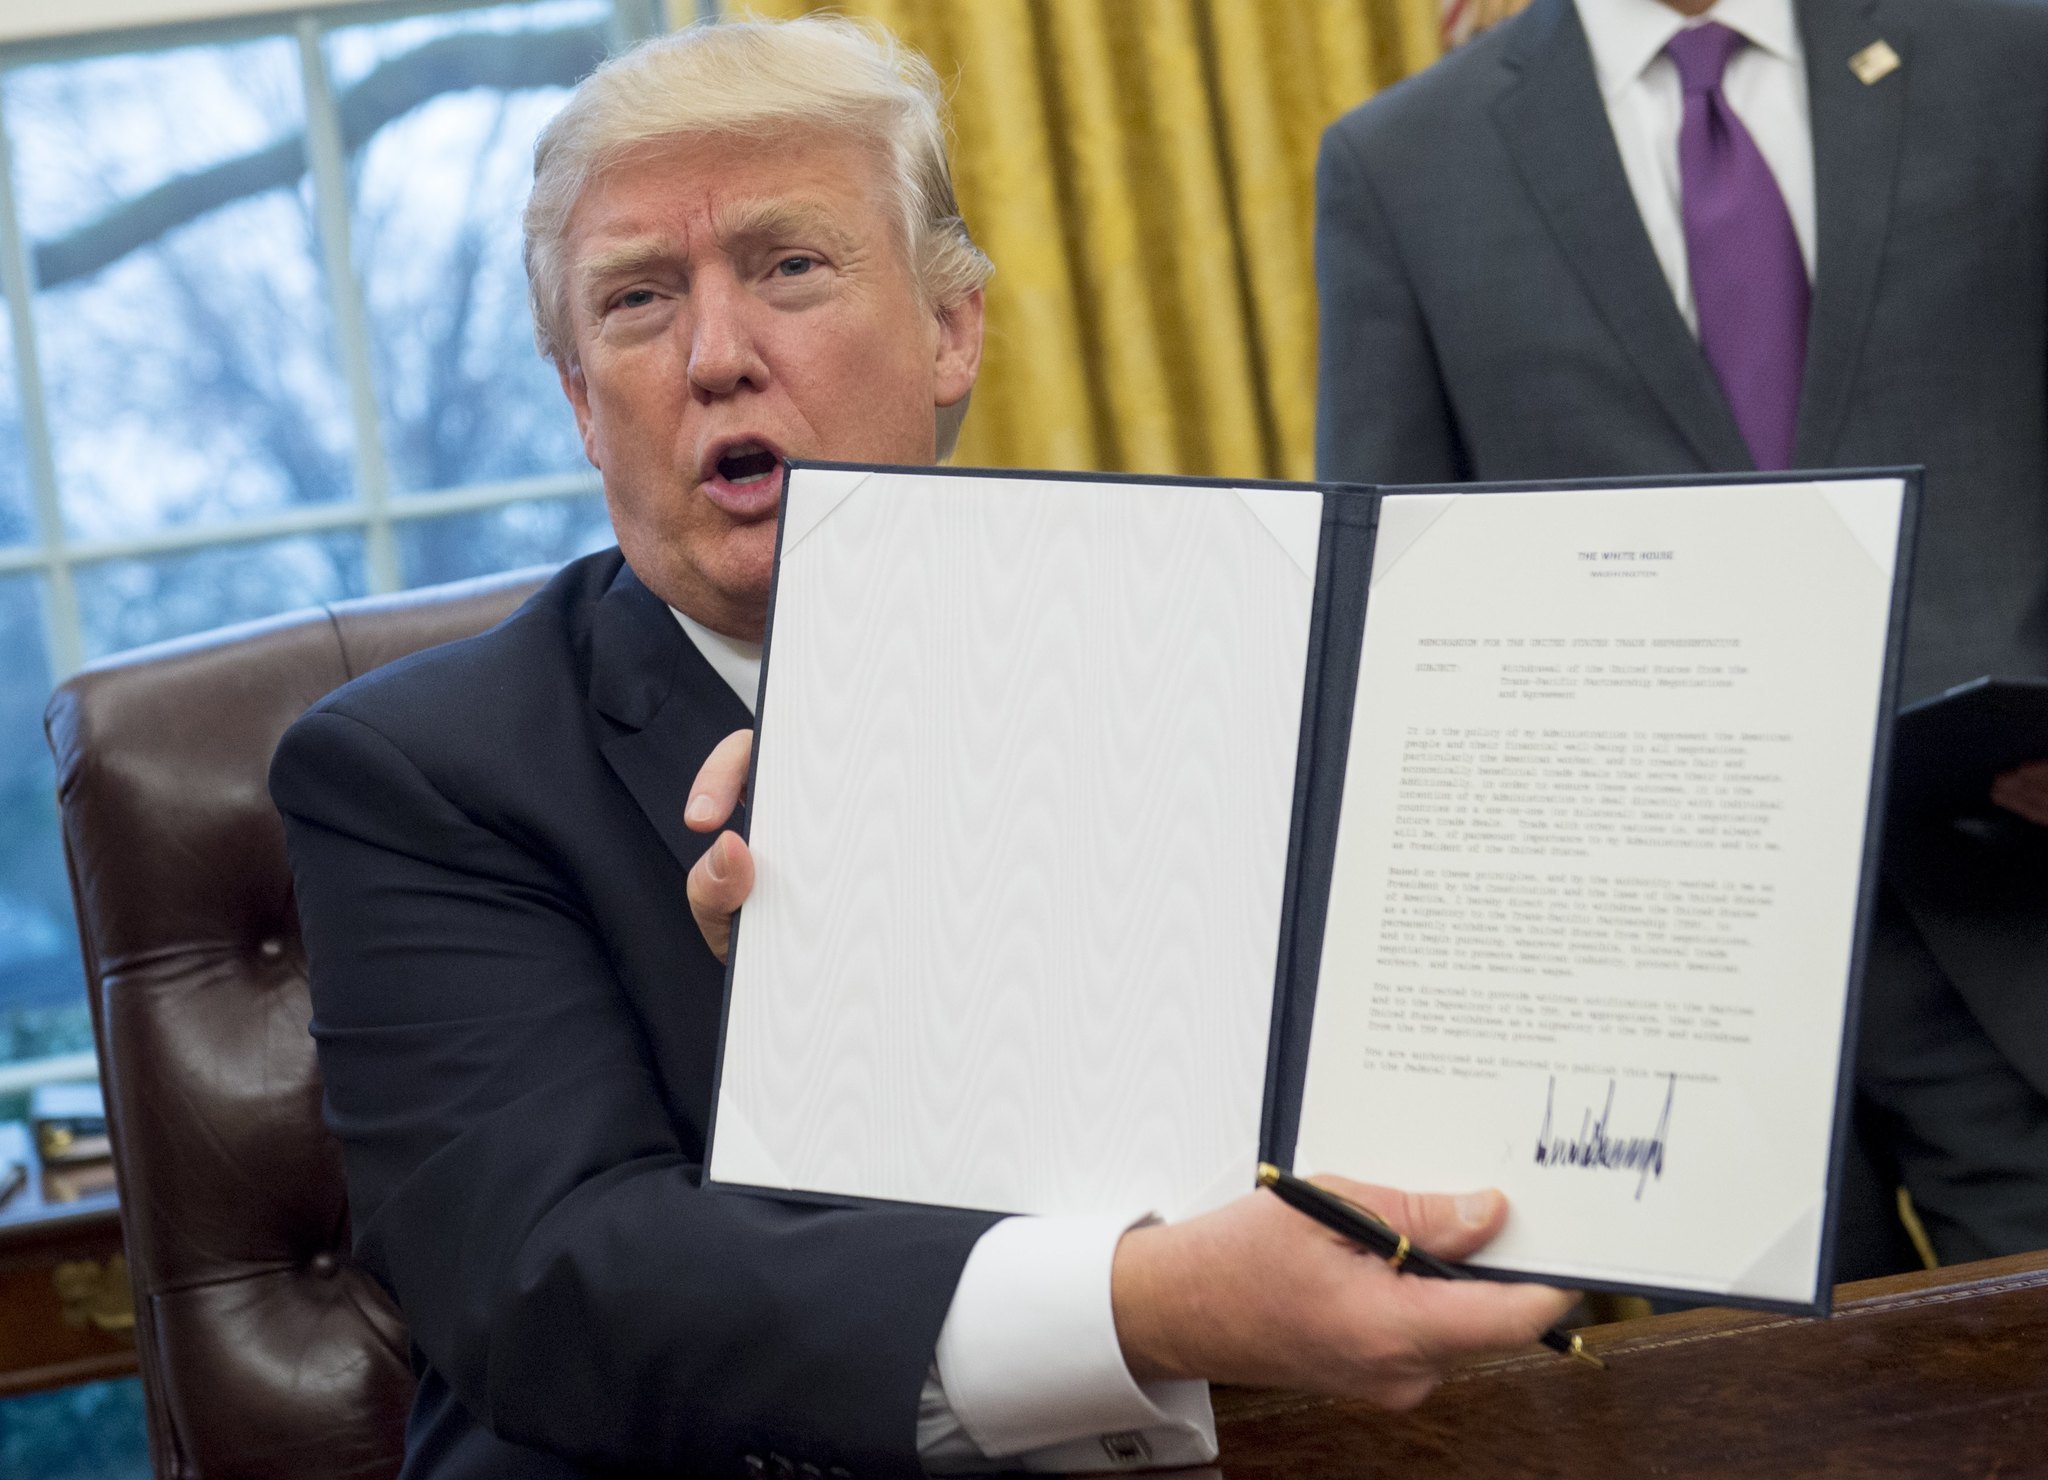 President Trump signs orders on hiring freeze, TPP exit, global abortion policy